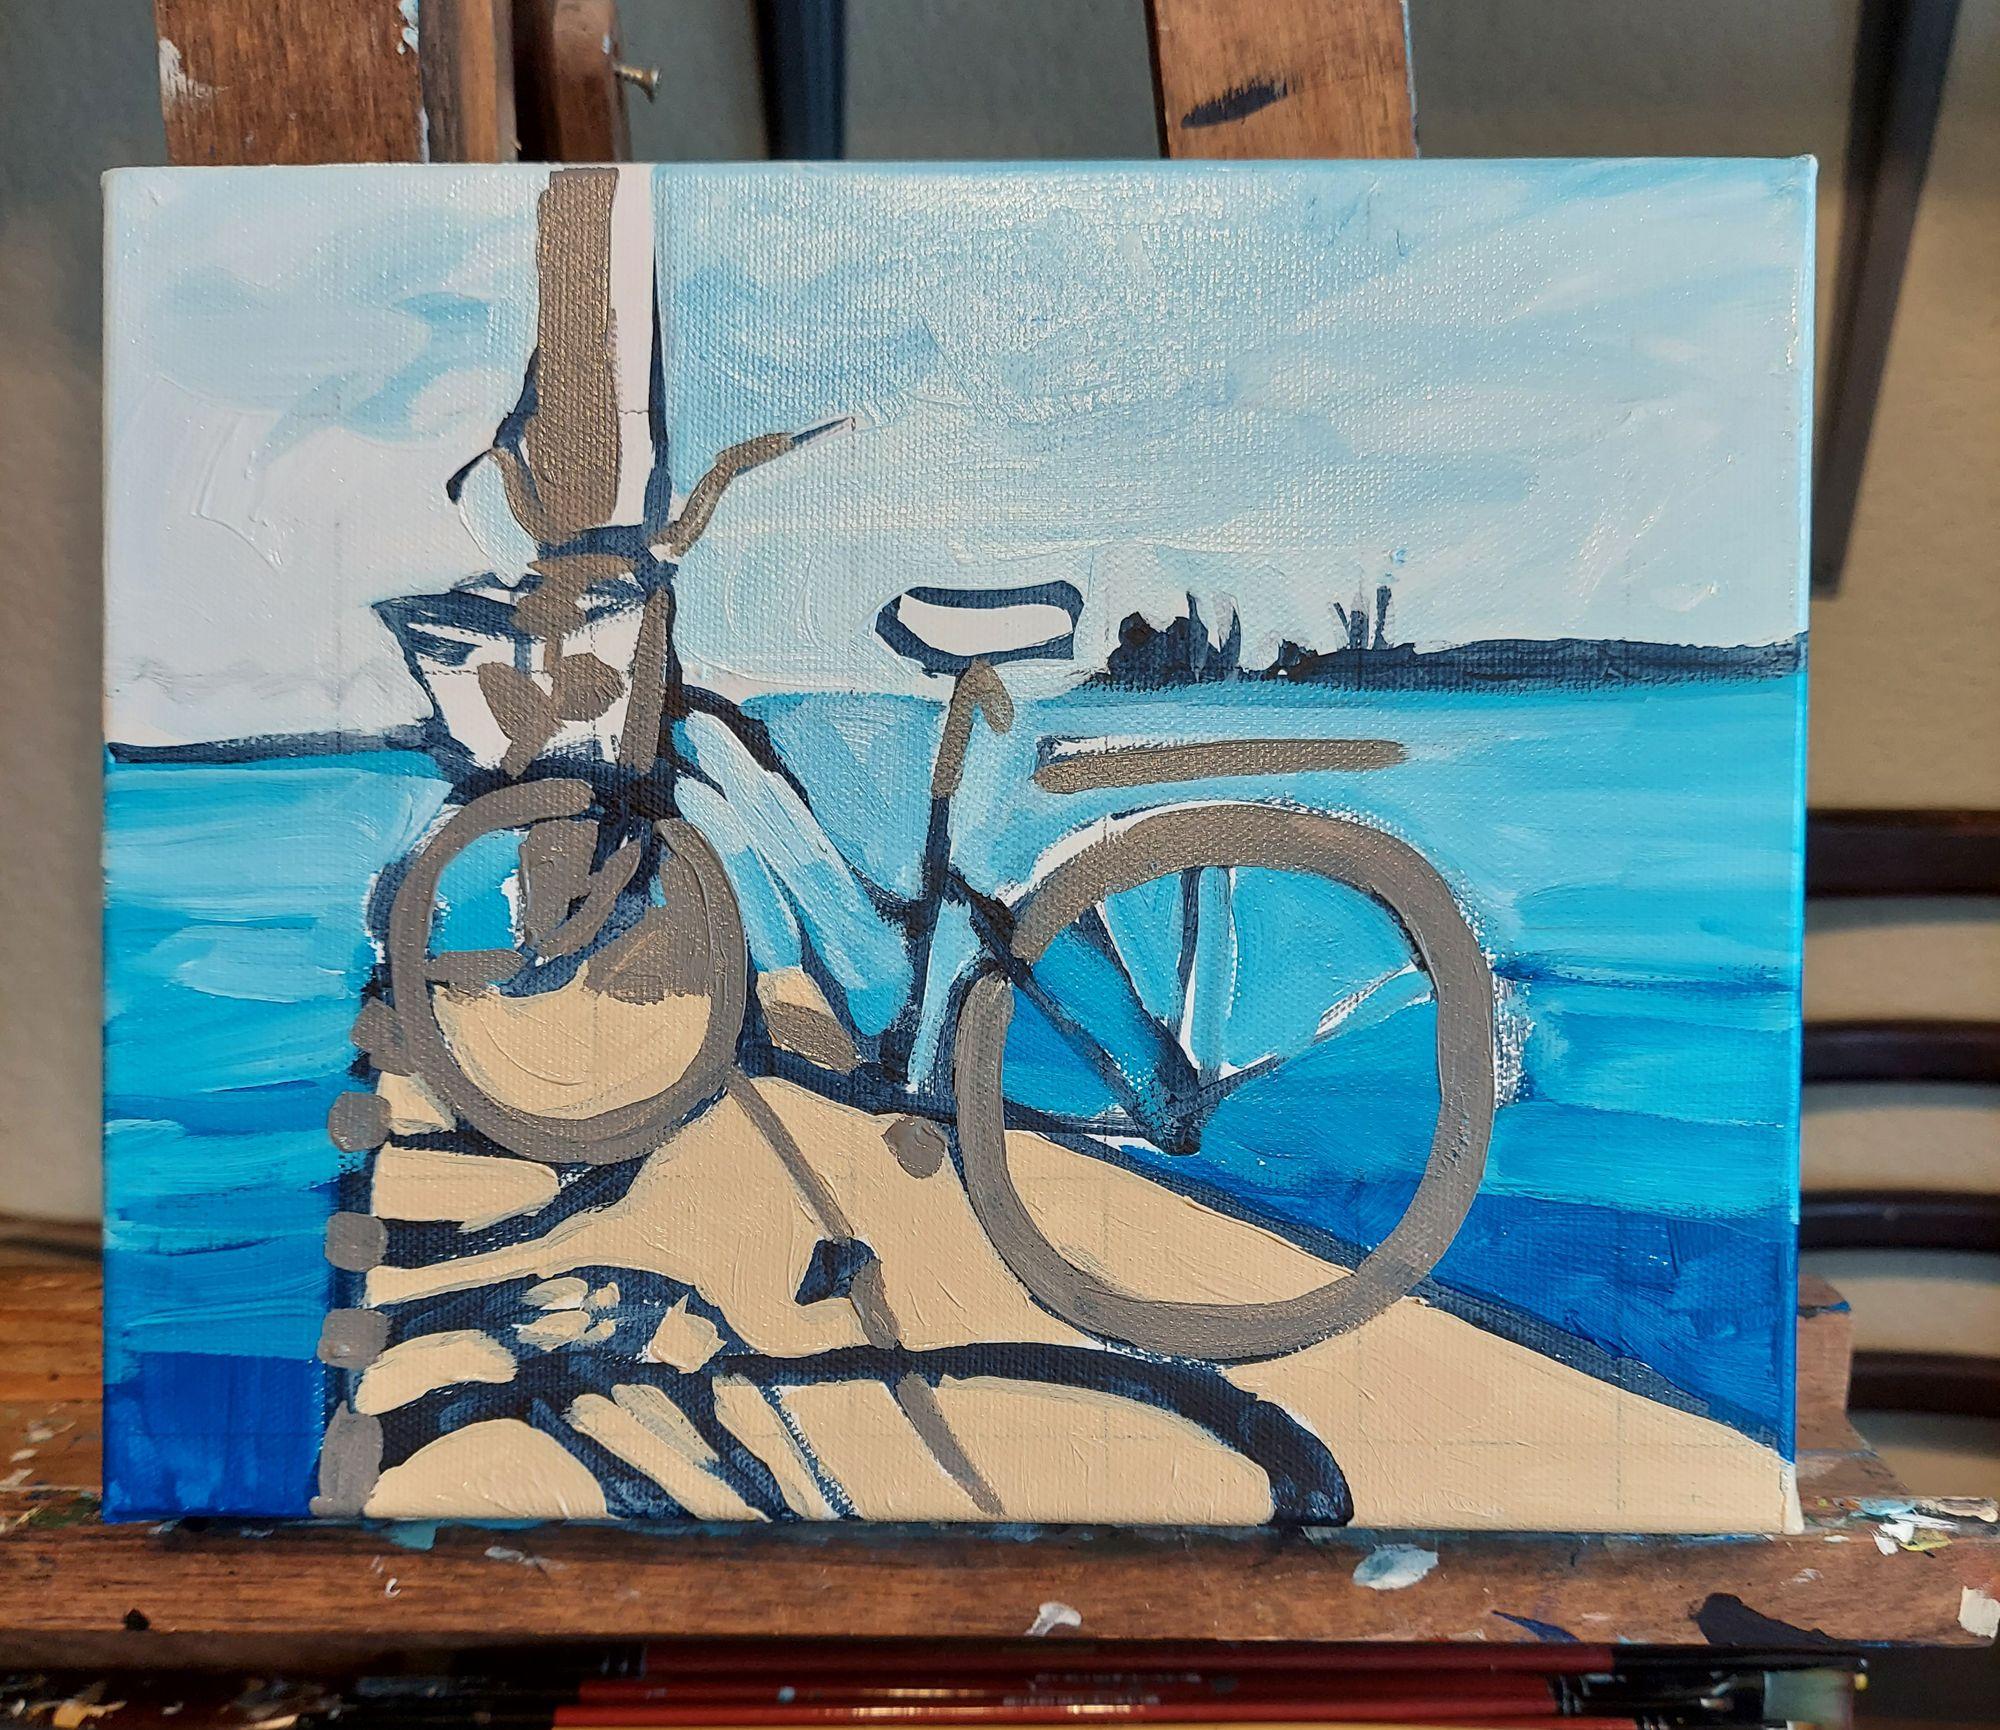 Bike left on a gravel pier on the Gulf Coast of Florida where the water is the color of turquoise. :: Painting :: Impressionist :: This piece comes with an official certificate of authenticity signed by the artist :: Ready to Hang: Yes :: Signed: